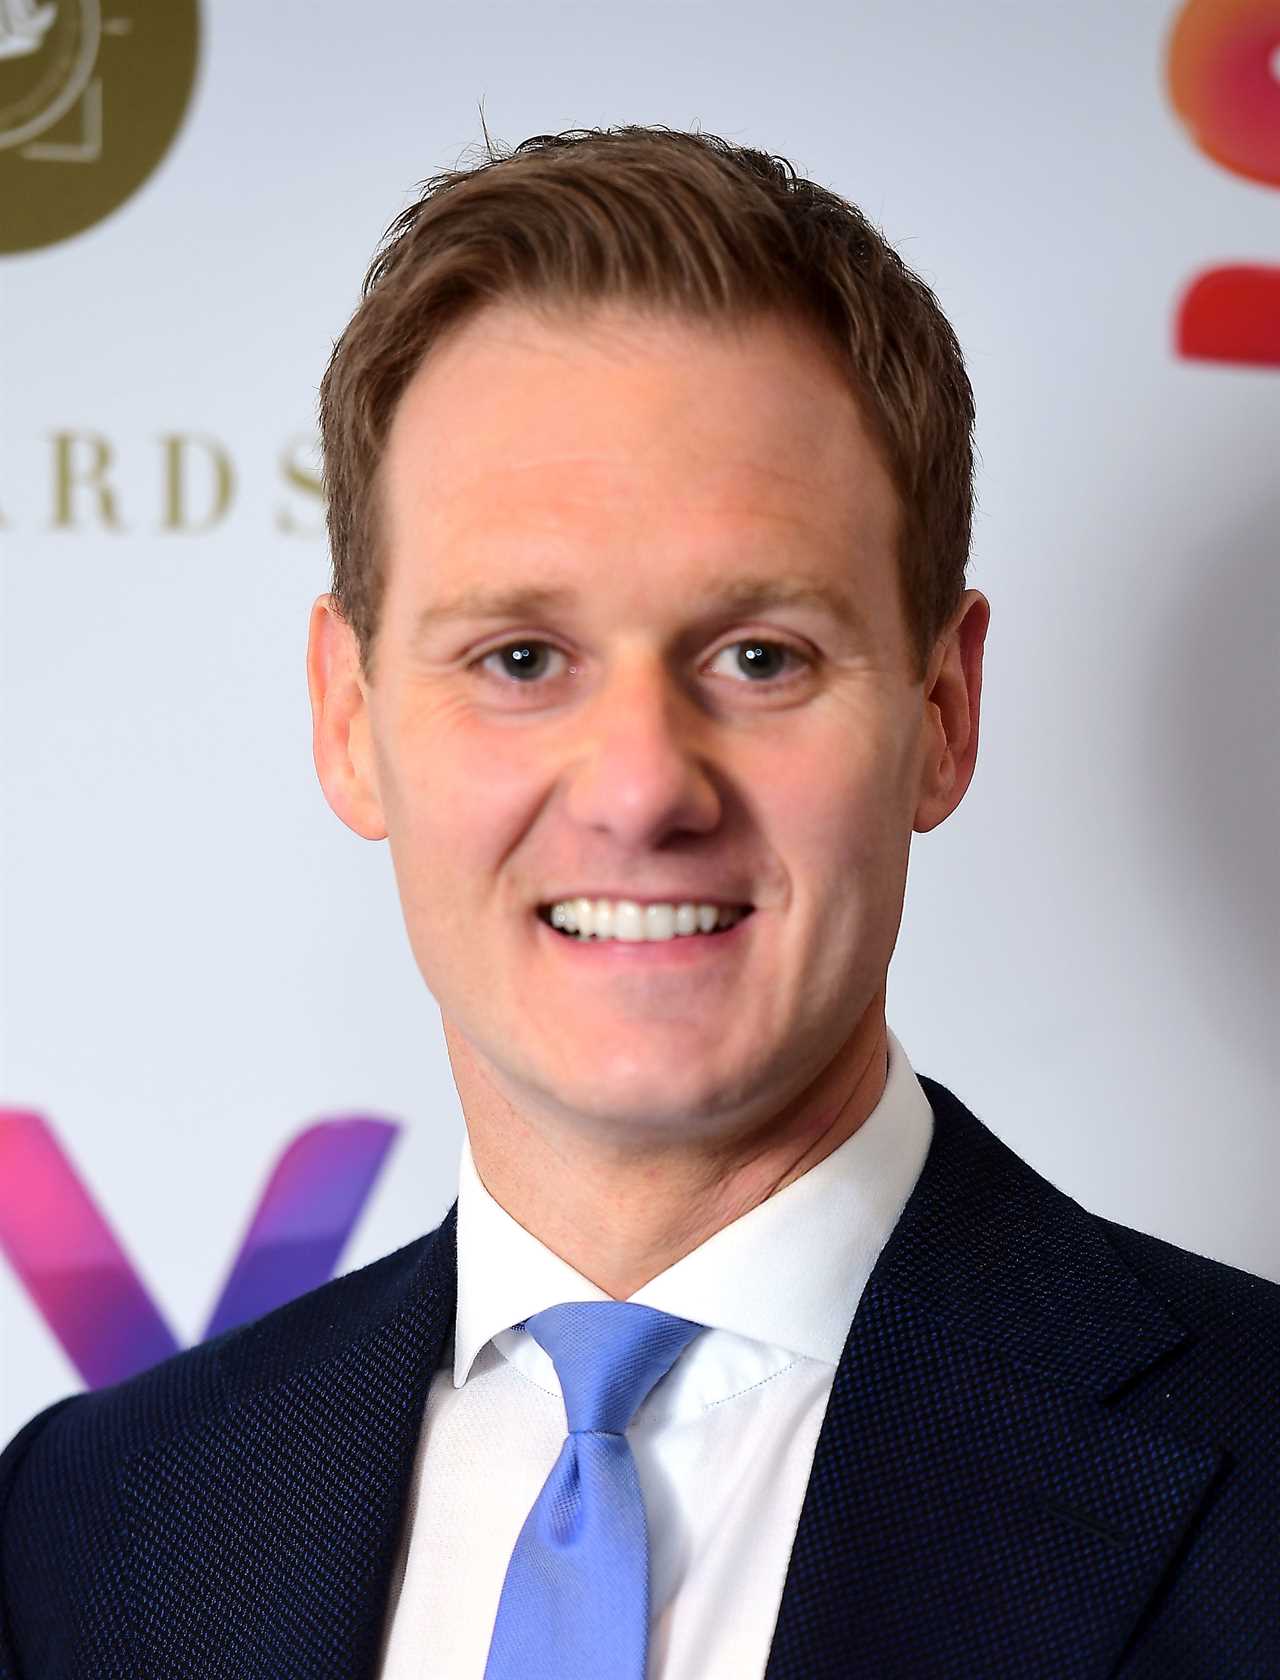 BBC Breakfast viewers all have the same complaint about Dan Walker’s latest interview as they rage ‘it’s time to go’